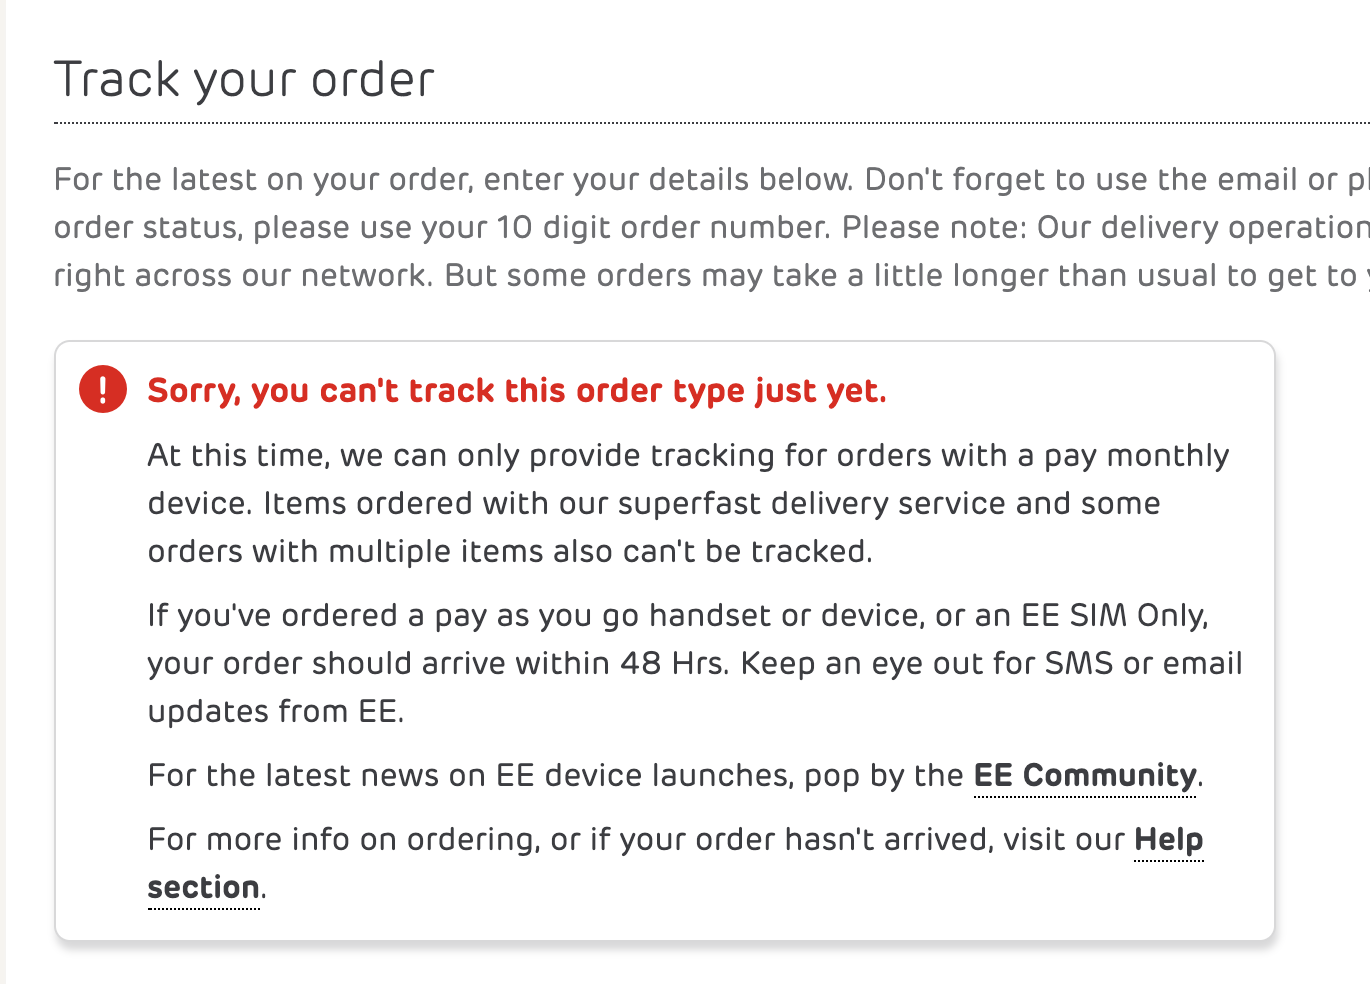 Order Tracking For Ee Pay Monthly Orders